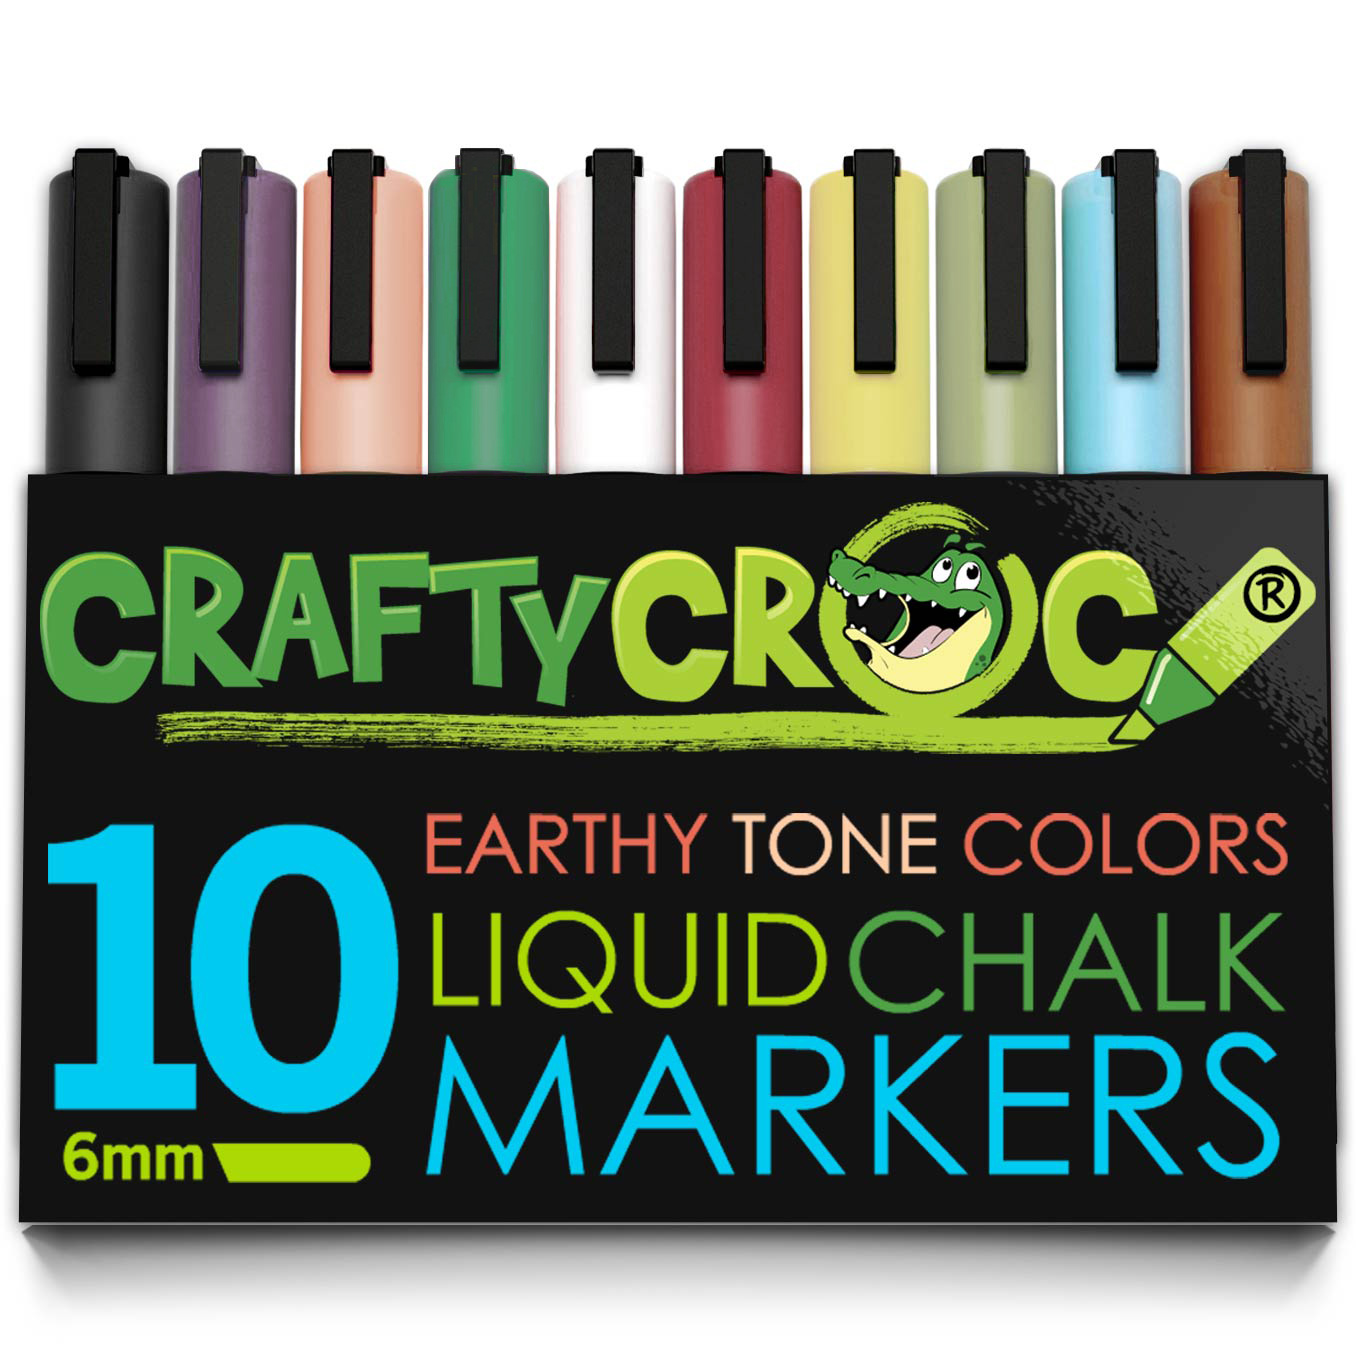 Crafty Crock Liquid Chalk Markers - as featured on homelifeabroad.com